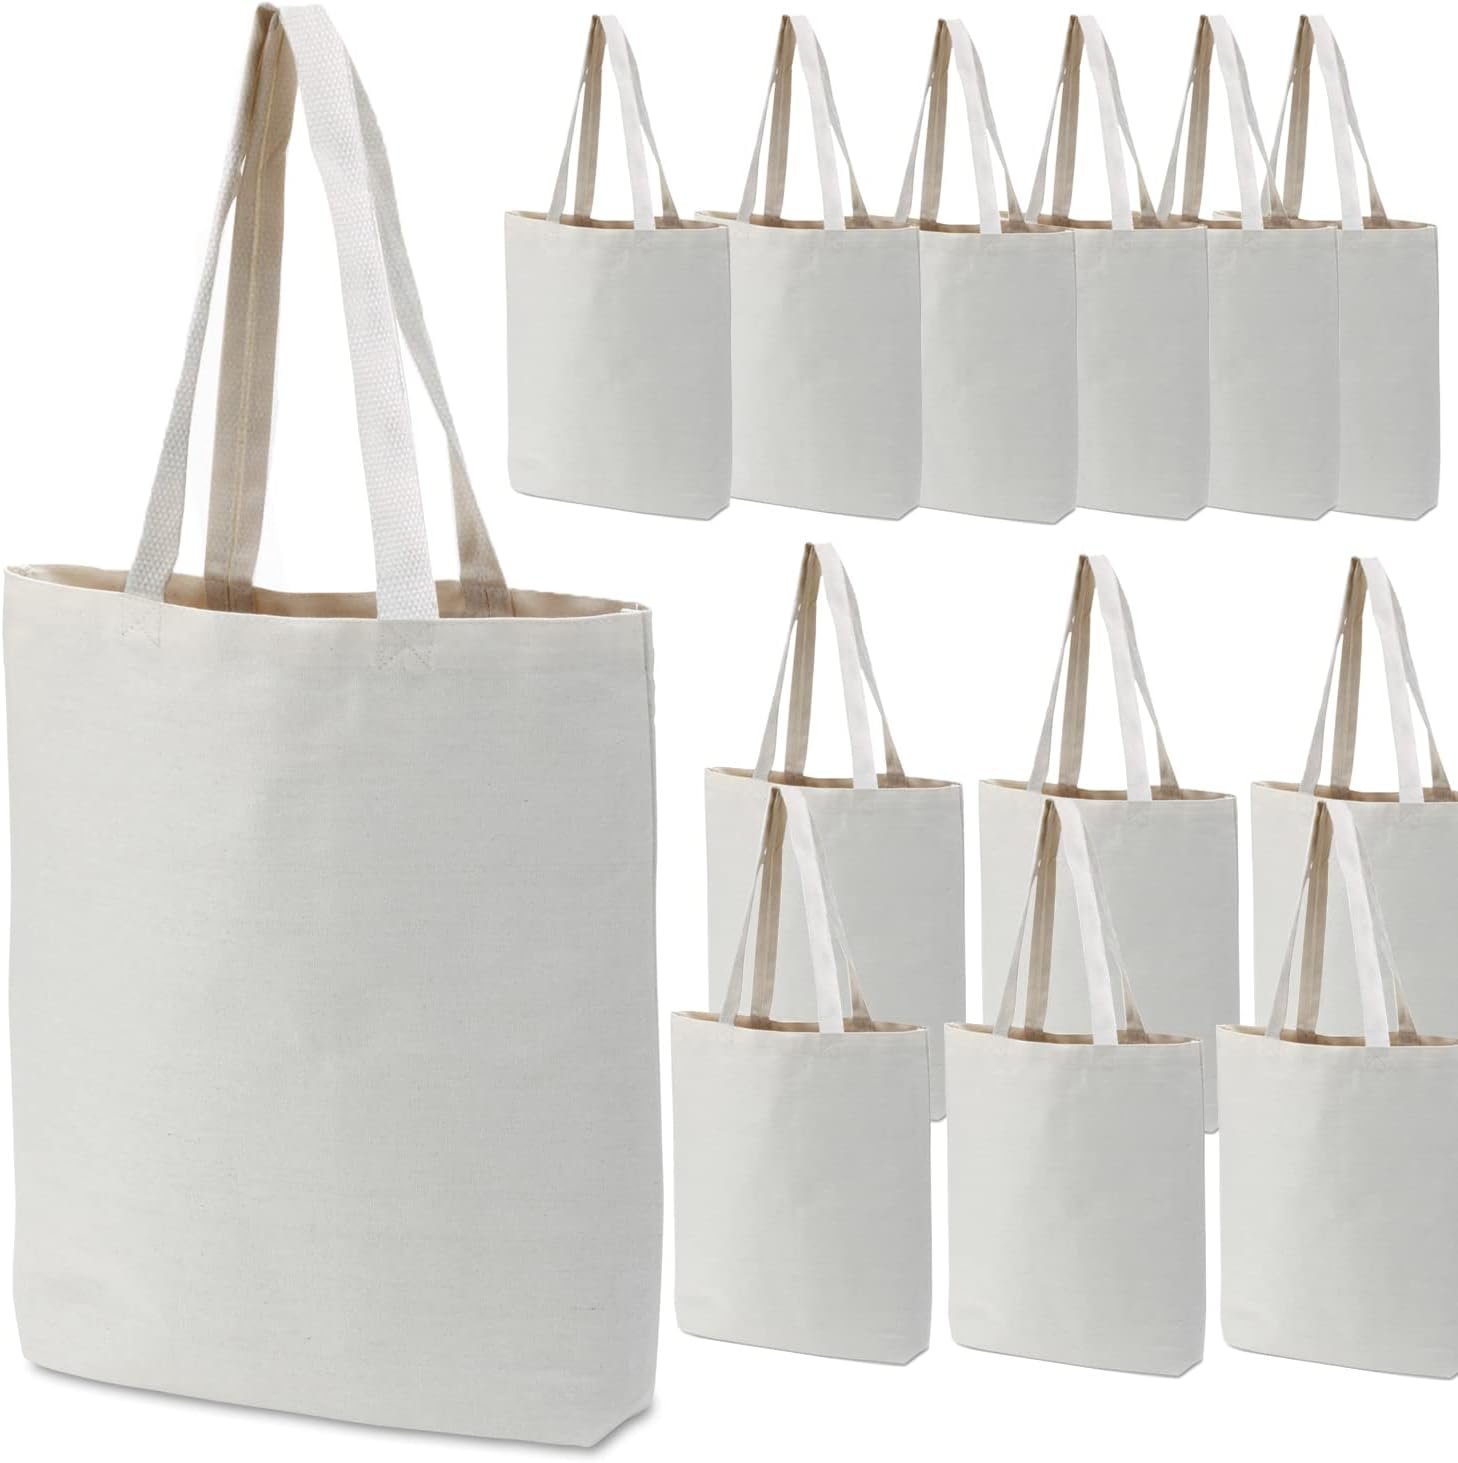 GiftExpress Pack of 26 Canvas Tote Bag Bulk, Cotton Totes for Embroidery, Crafting , DIY Projects, Bridesmaids Totes, Reusable Grocery Shopping Bags, 13 x 11 Inch(26 Pack)